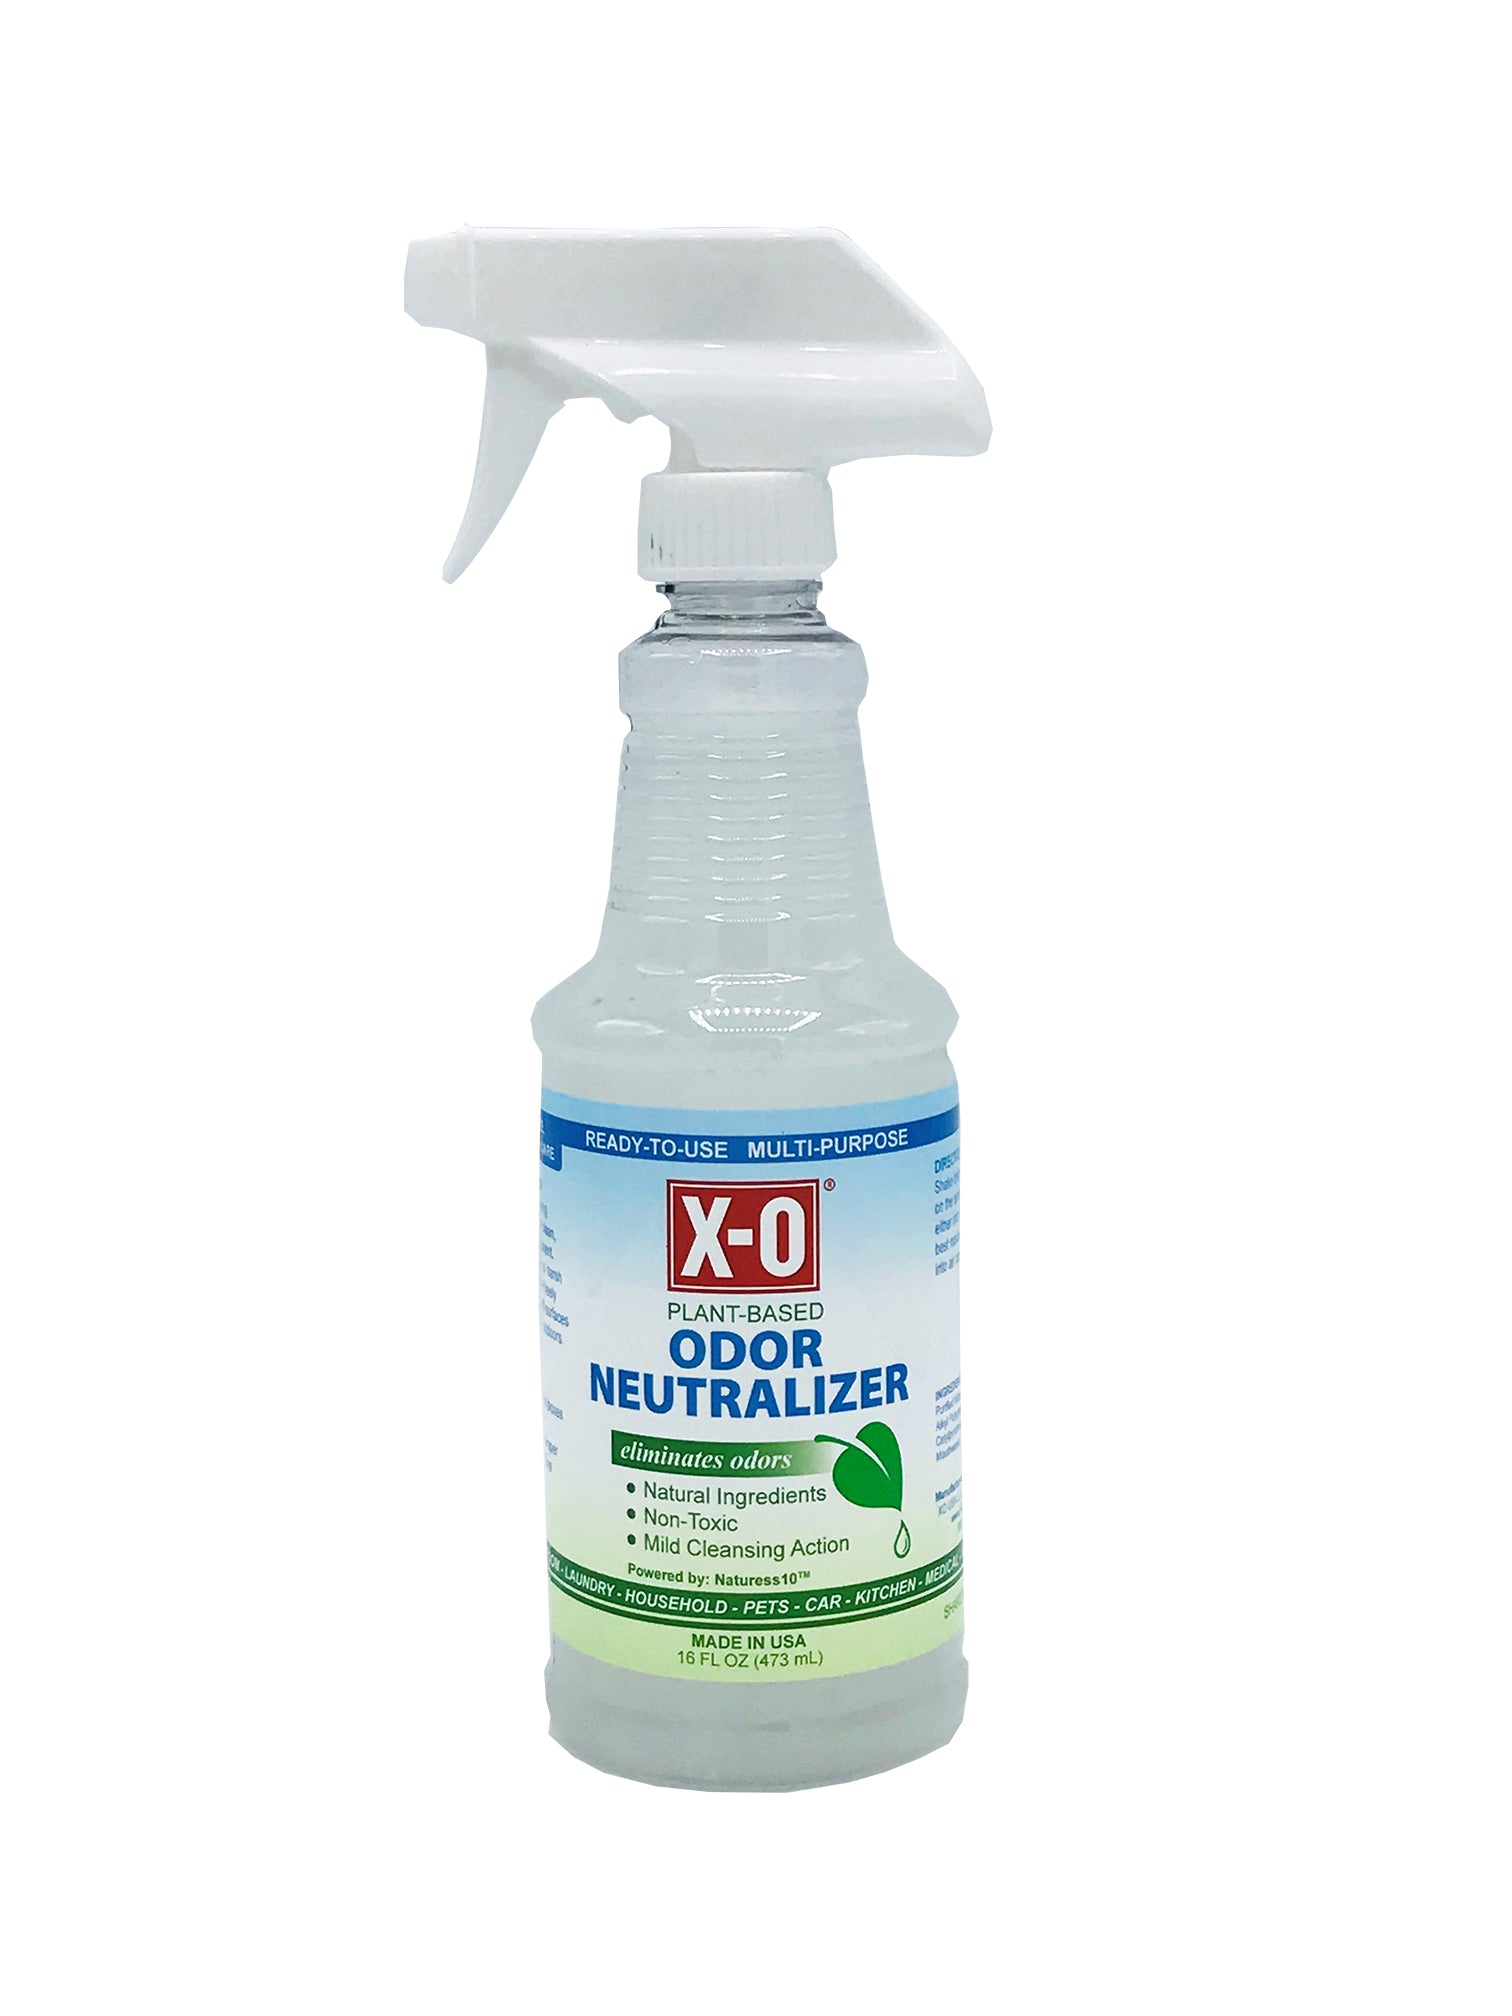 Don Aslett X-O Quart: ALL NATURAL, MILD CLEANER, SUPER CONCENTRATE.